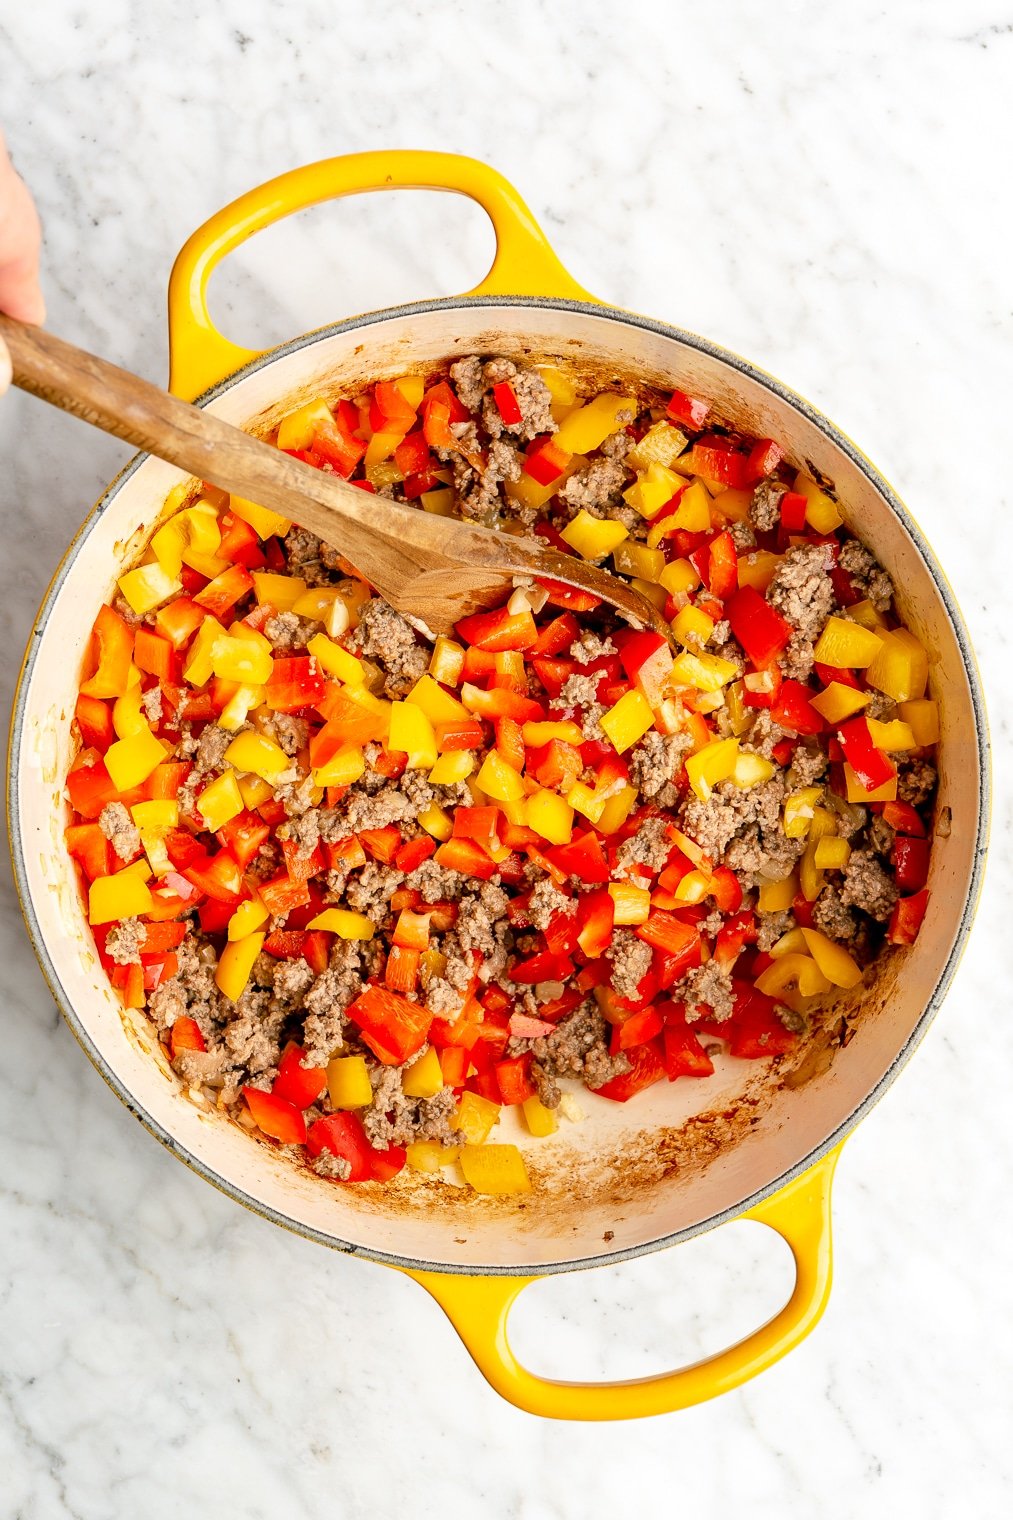 A person stirring chopped yellow and red bell peppers into a pot of browned ground beef and sauteed onions and garlic.